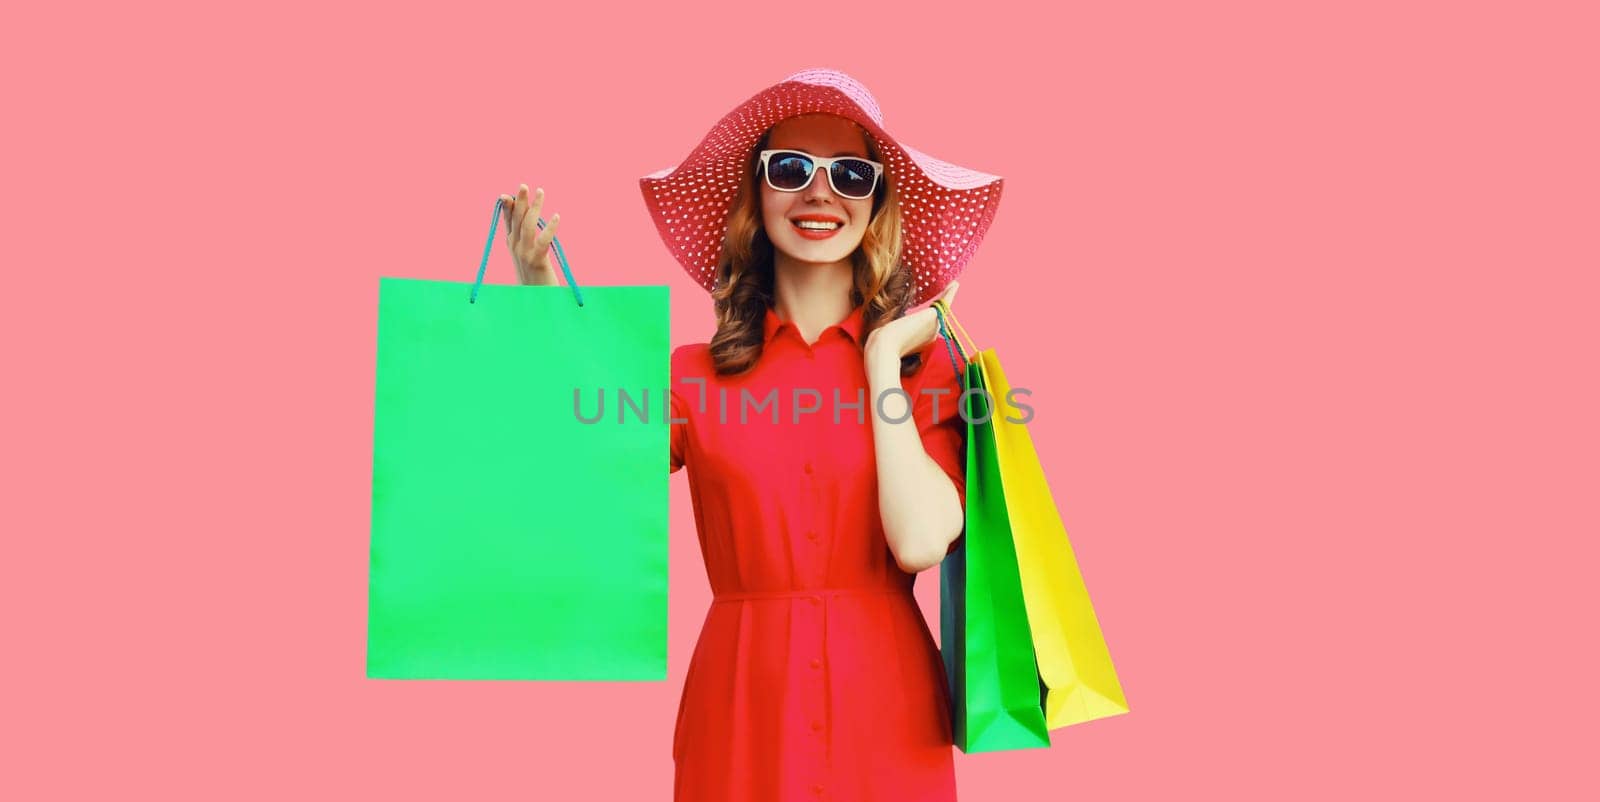 Portrait of beautiful happy smiling young woman model posing with colorful shopping bags in summer straw hat, dress on pink studio background